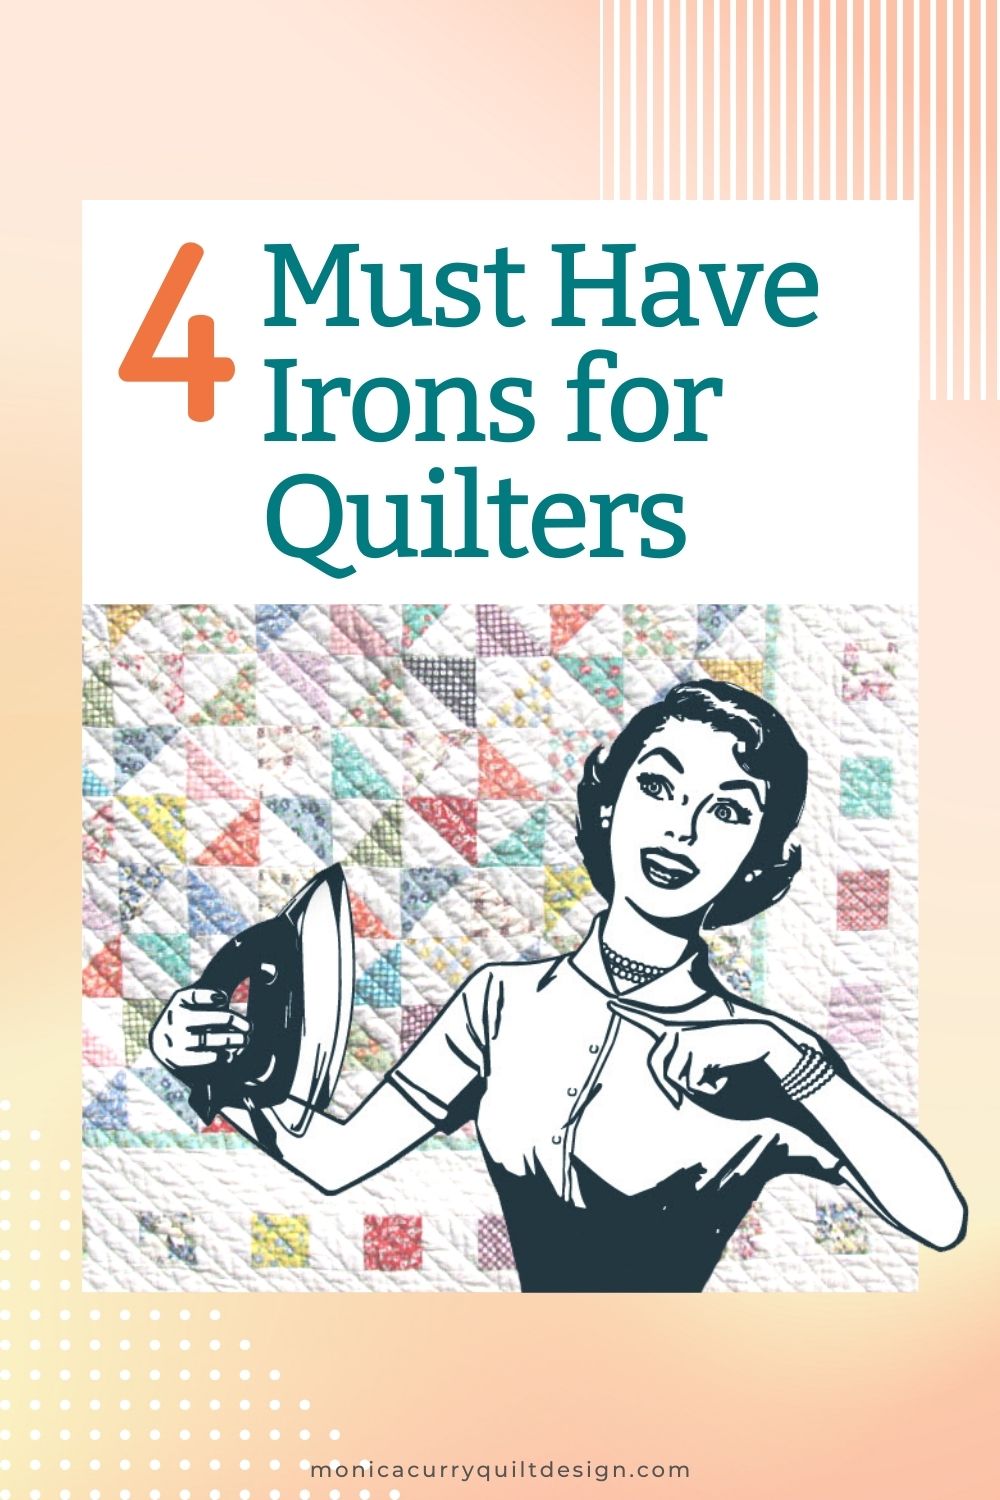 What is your favorite mini iron to use for quilting? : r/quilting